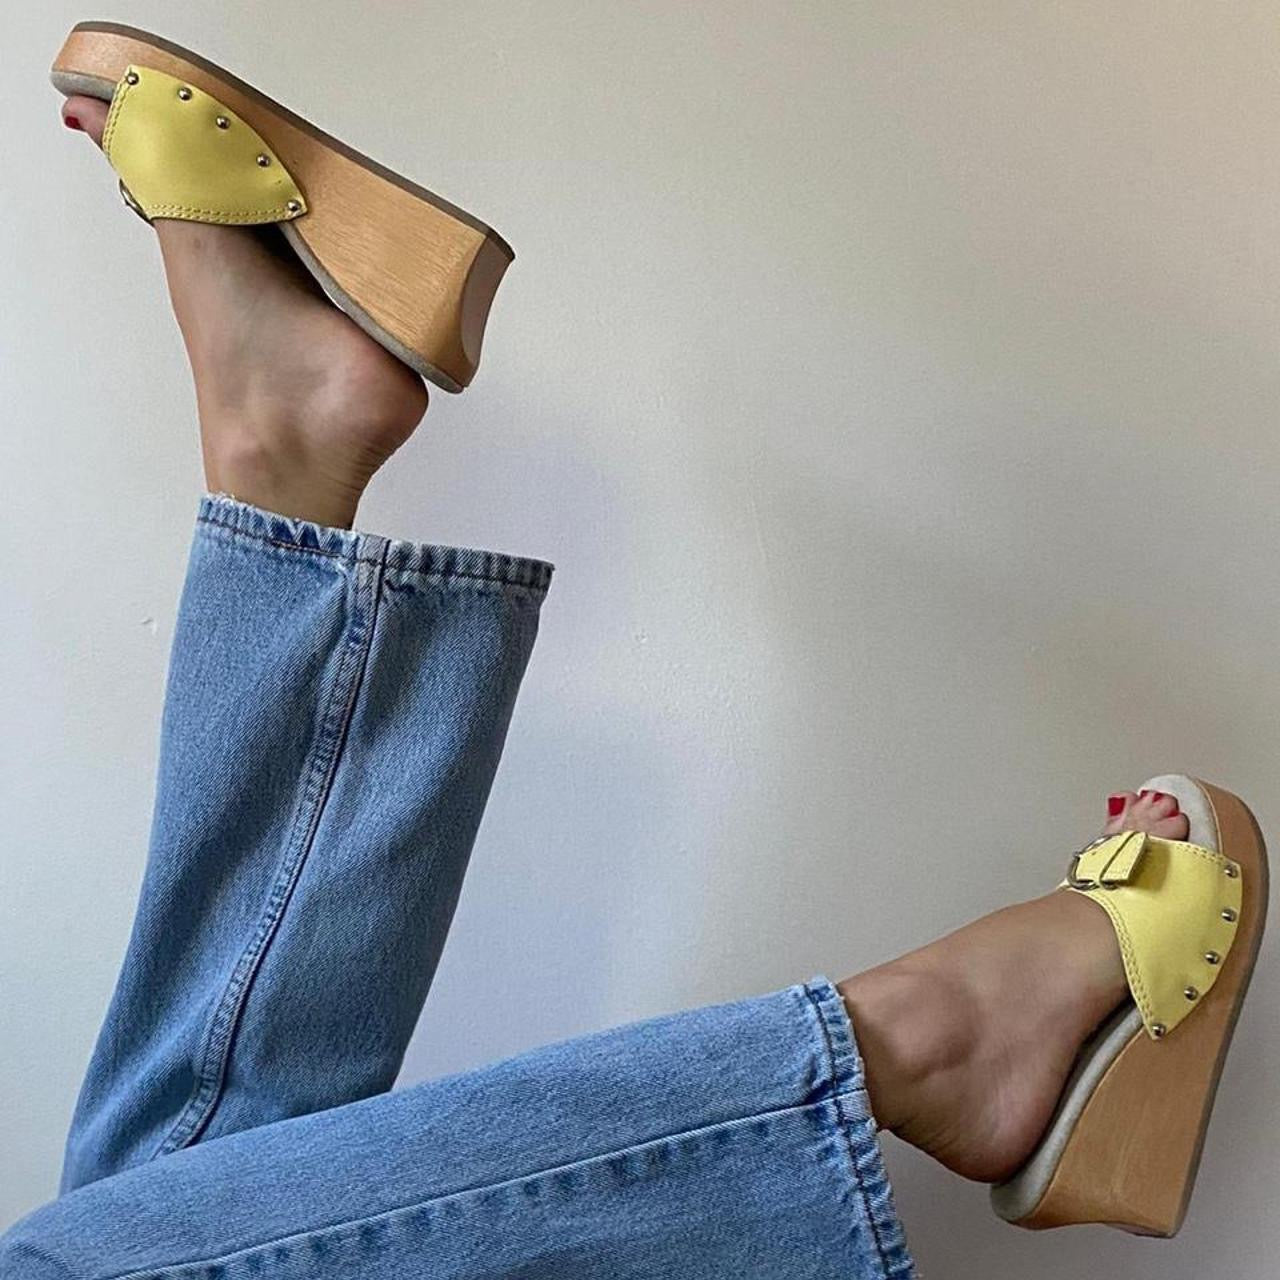 Vintage 90s Steve Madden yellow shoes